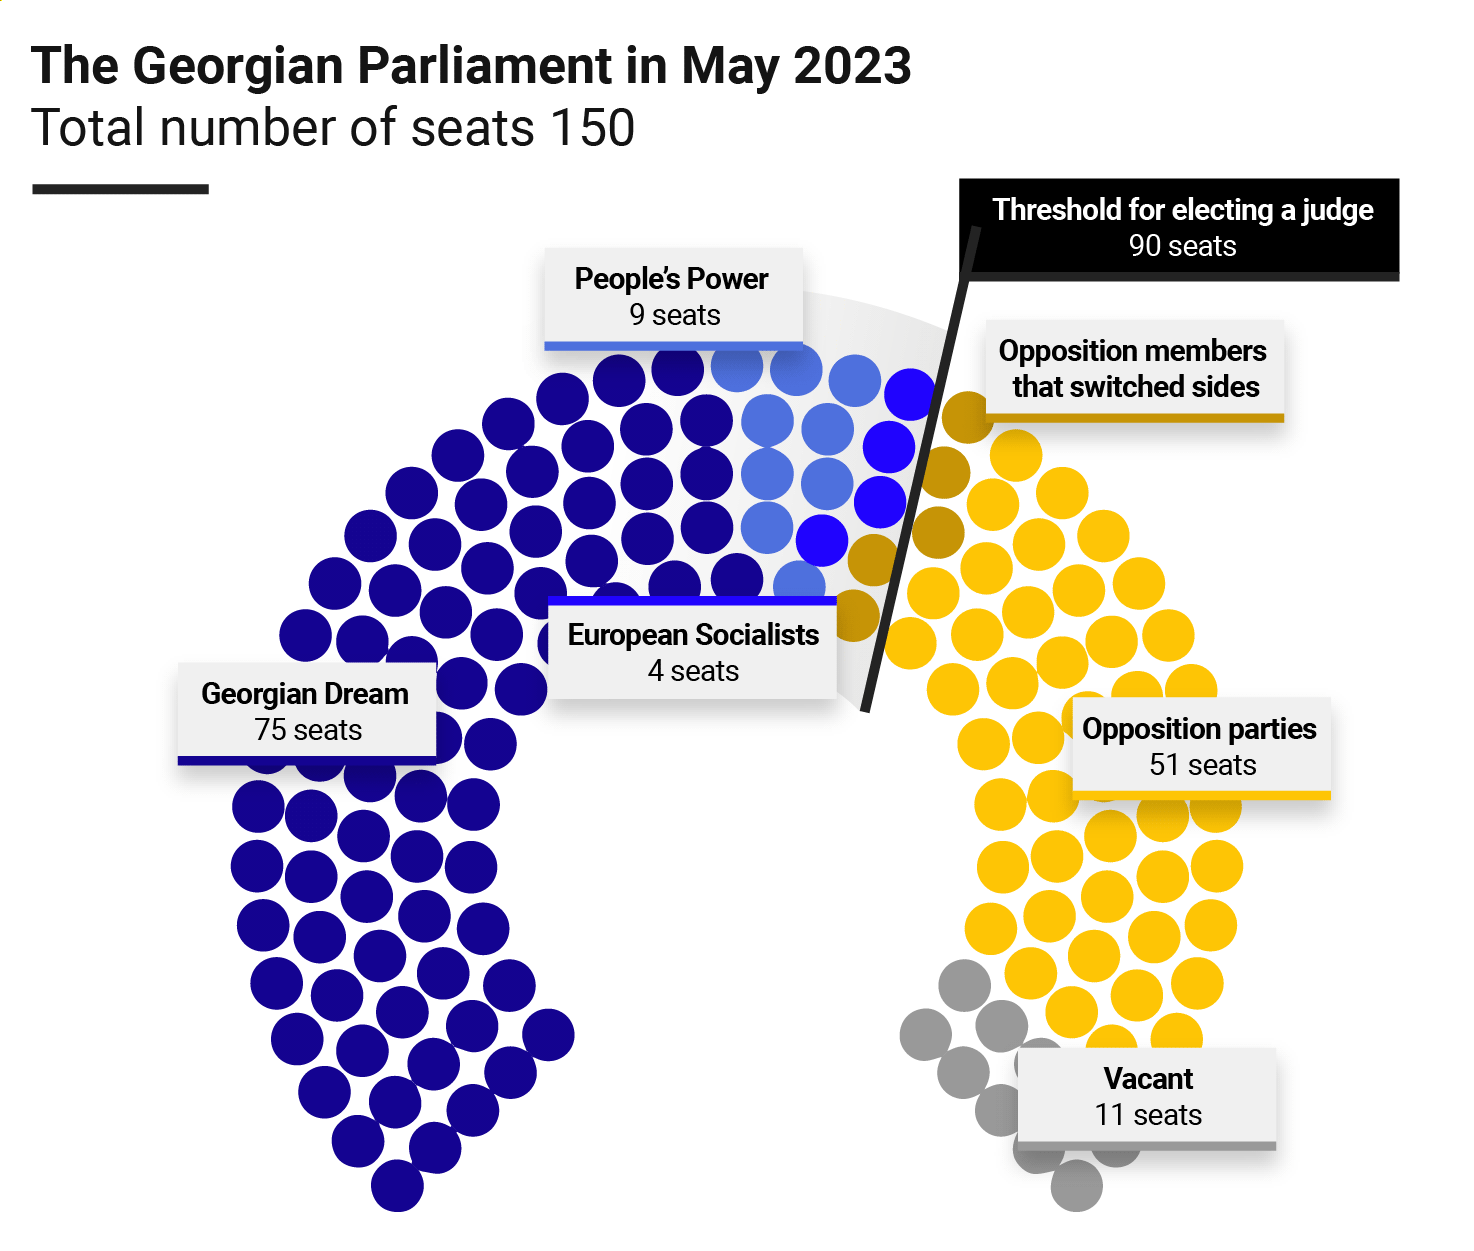 An infographic showing the seats of the Georgian Parliament in May 2023 qhidqkiqzeidtzinv